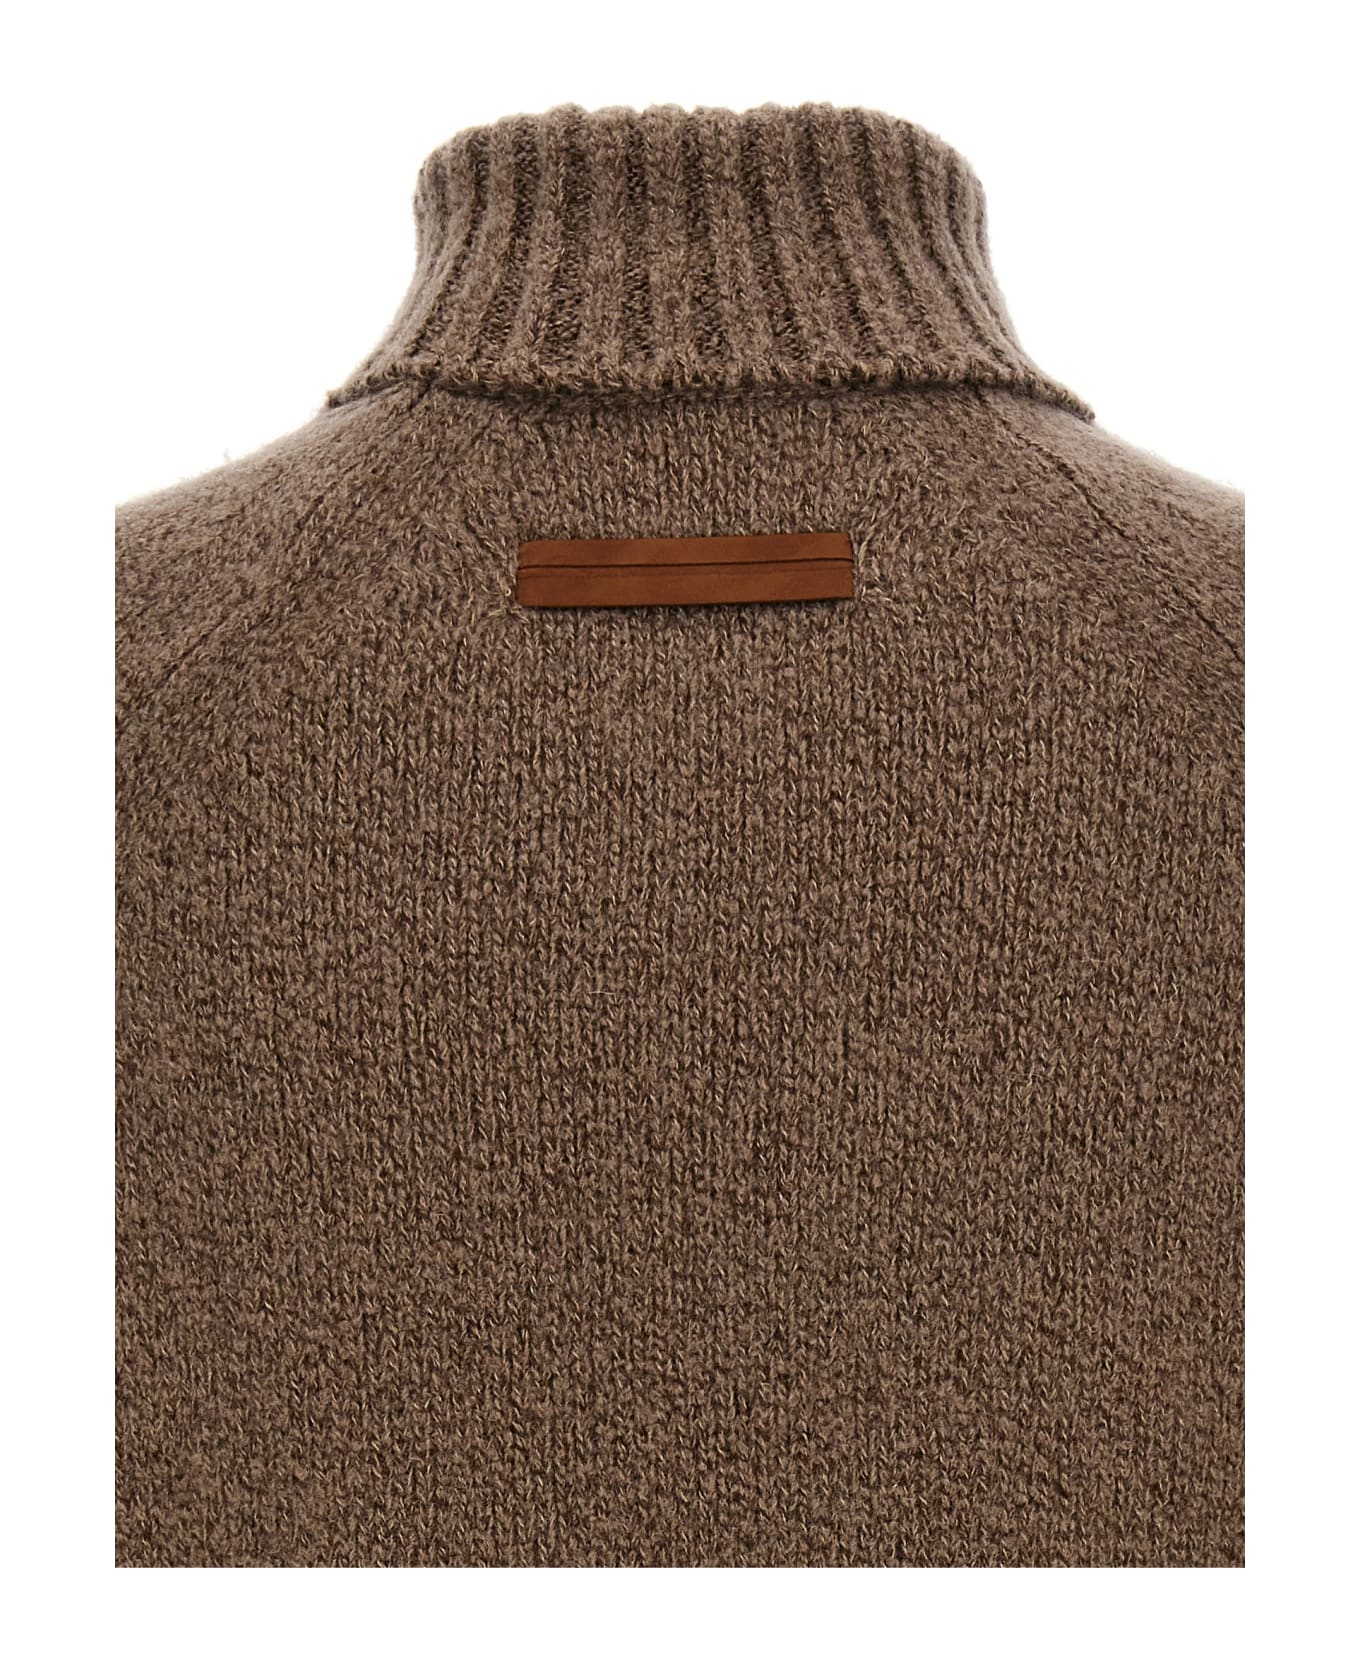 Zegna Boucle Silk Cashmere Sweater - BROWN